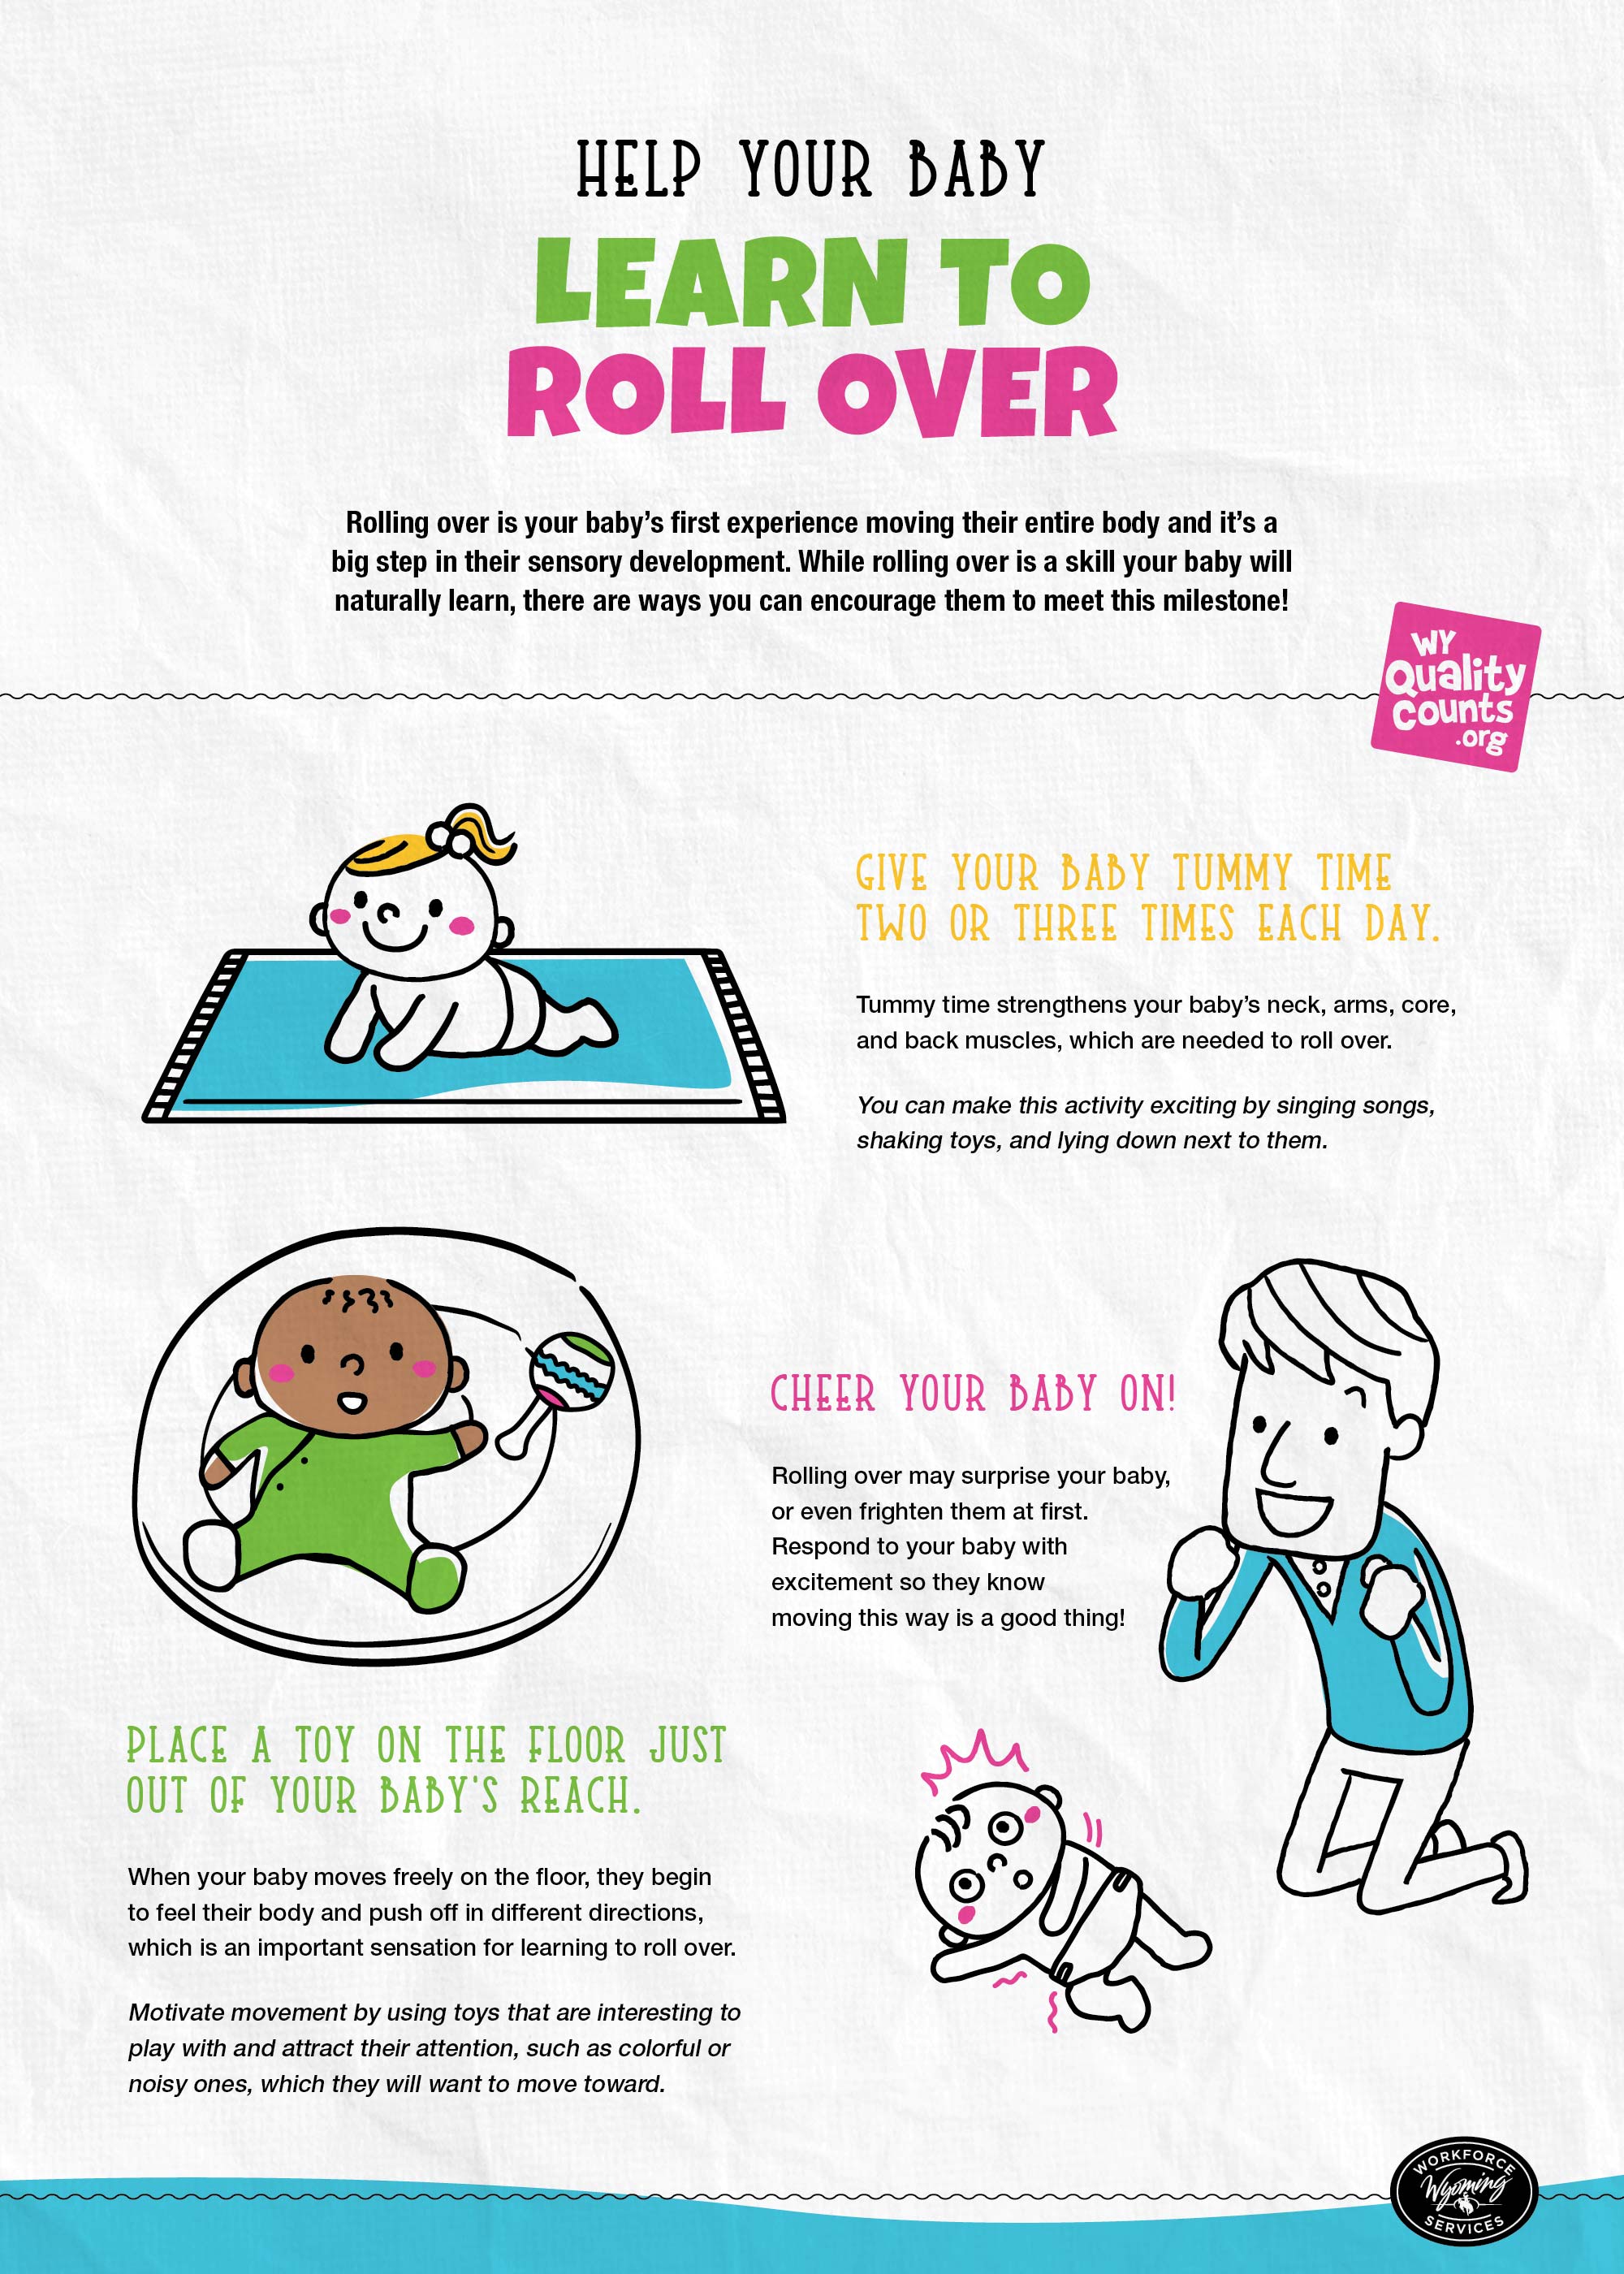 How to Encourage Your Baby to Roll Over